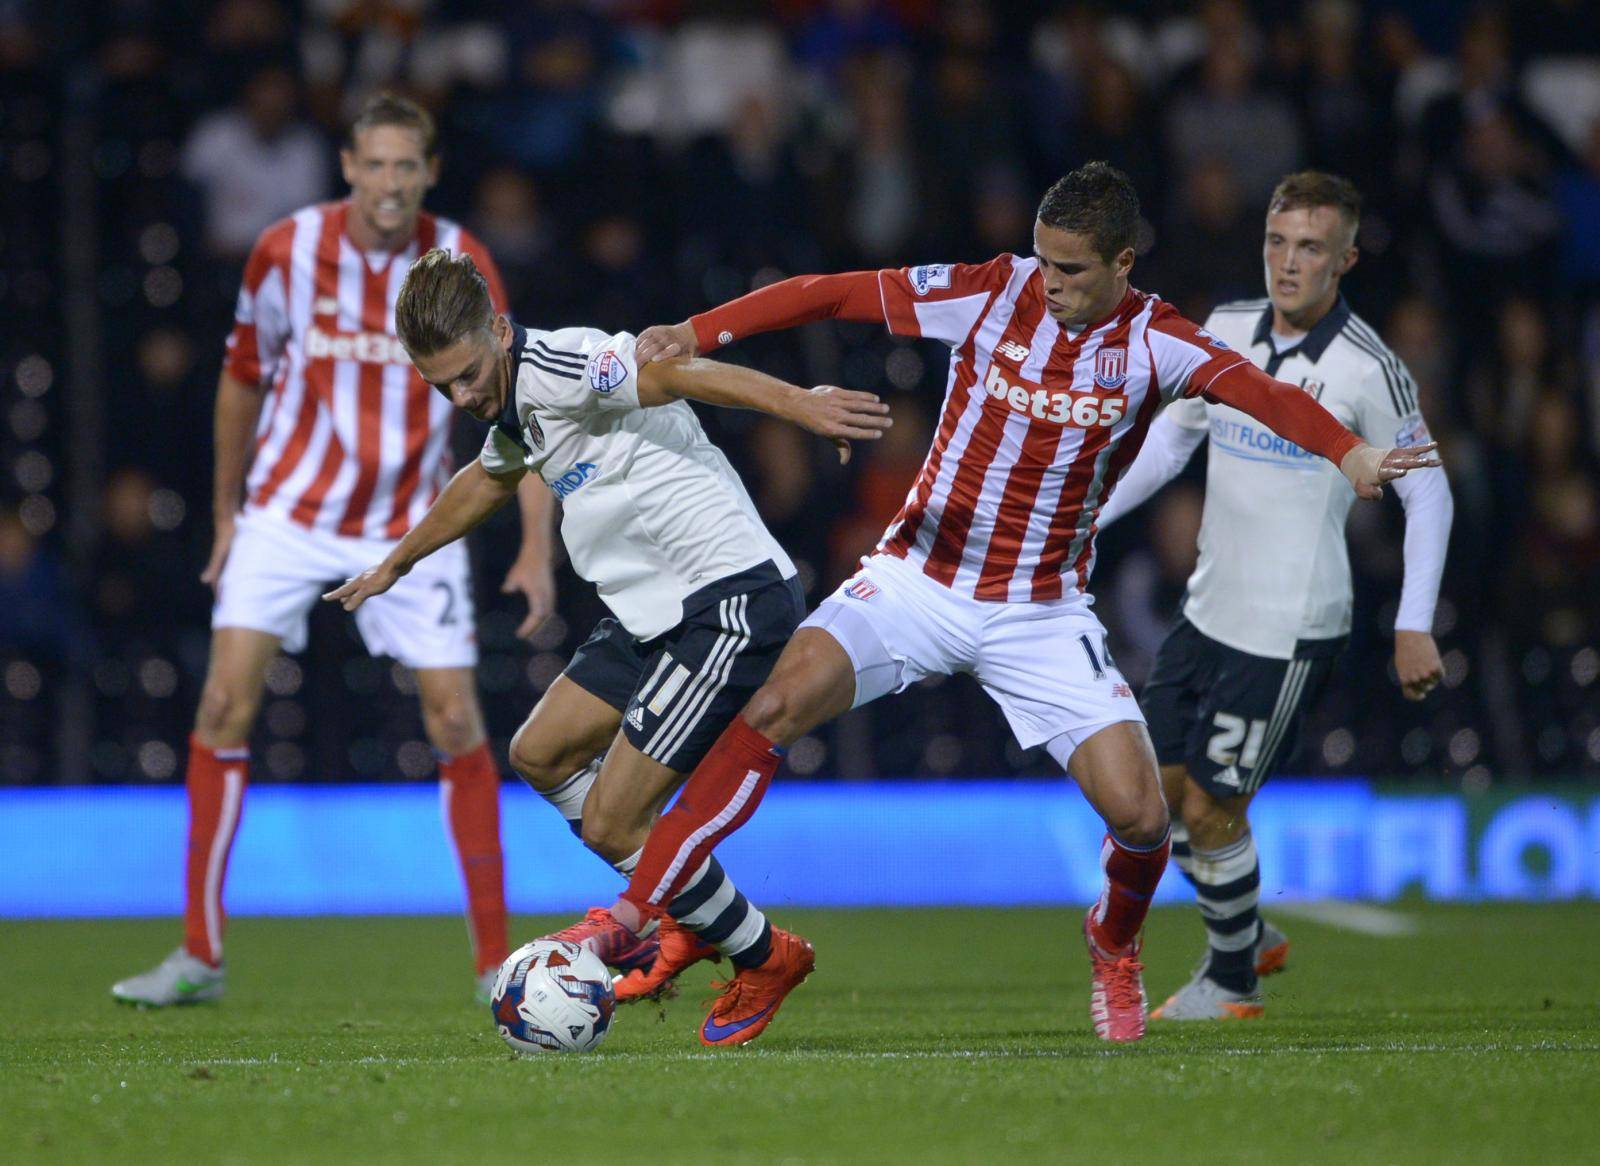 Soccer - Capital One Cup - Third Round - Fulham v Stoke City - Craven Cottage